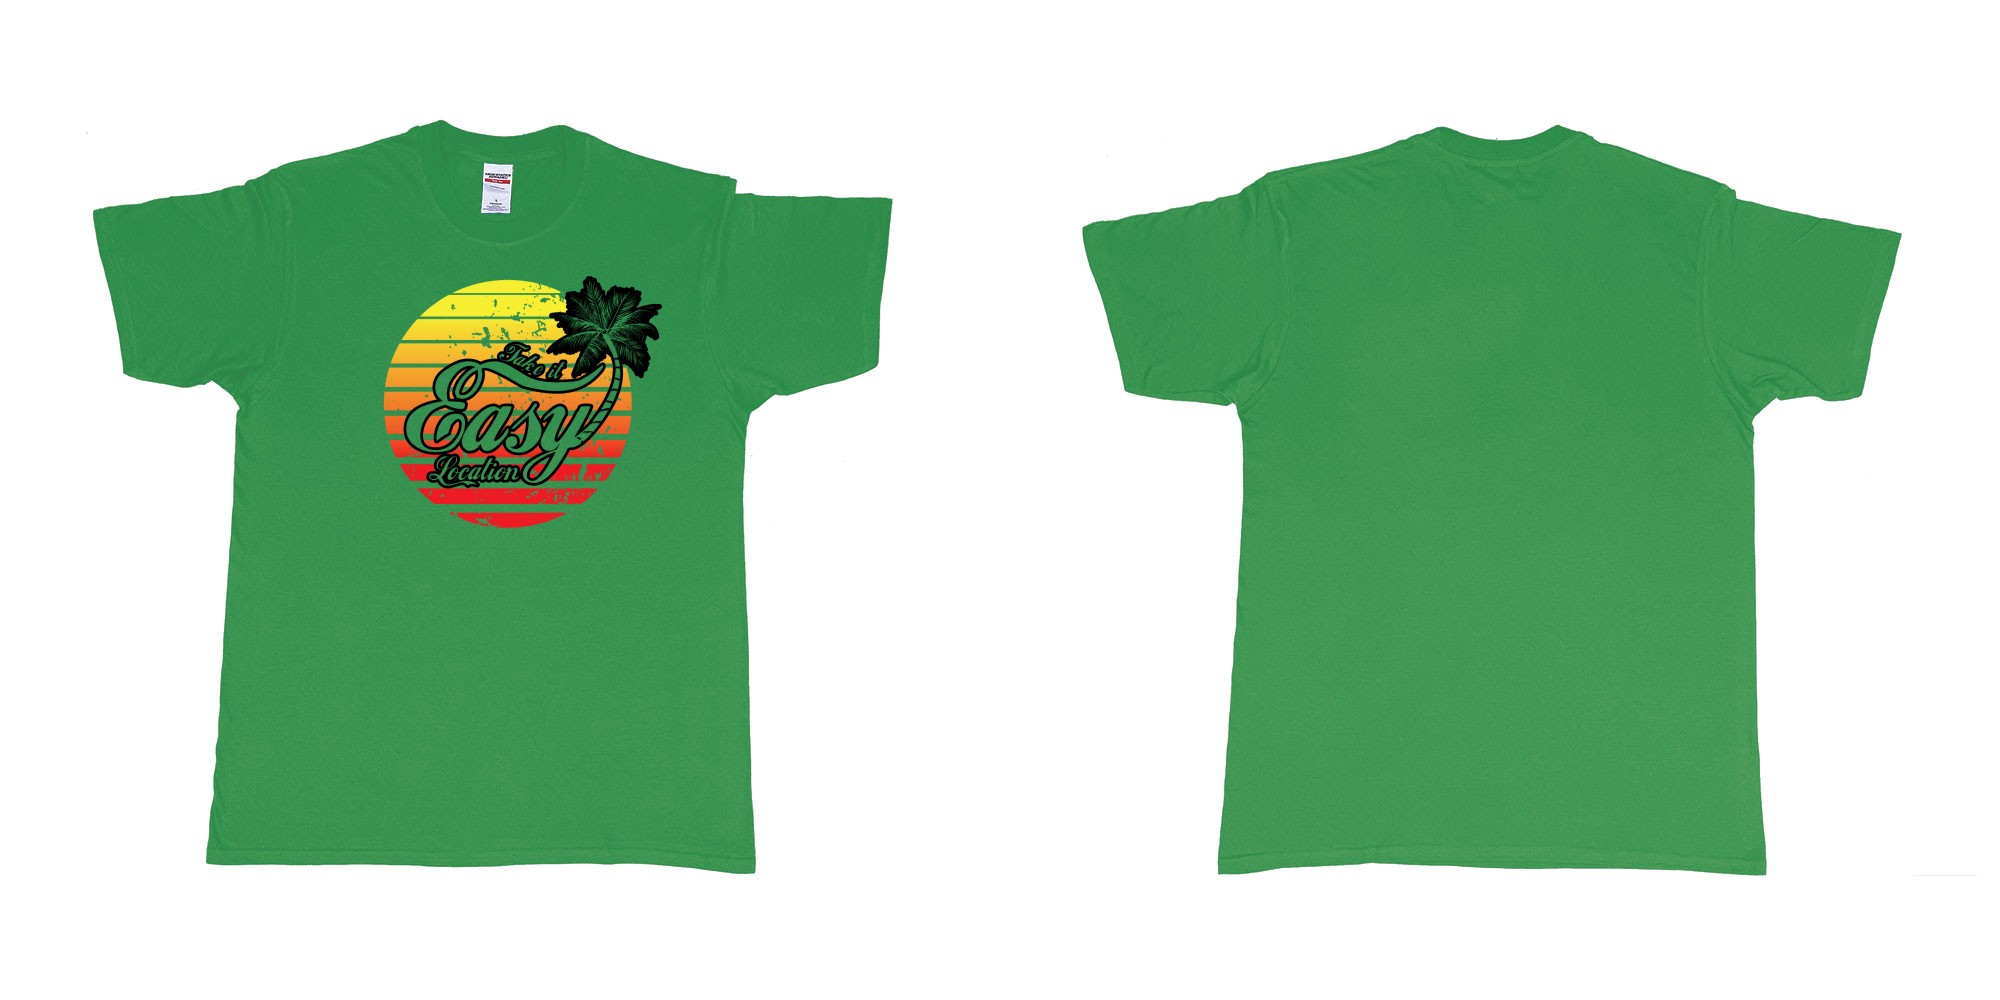 Custom tshirt design take is easy own location easy tee bali custom text printing in fabric color irish-green choice your own text made in Bali by The Pirate Way